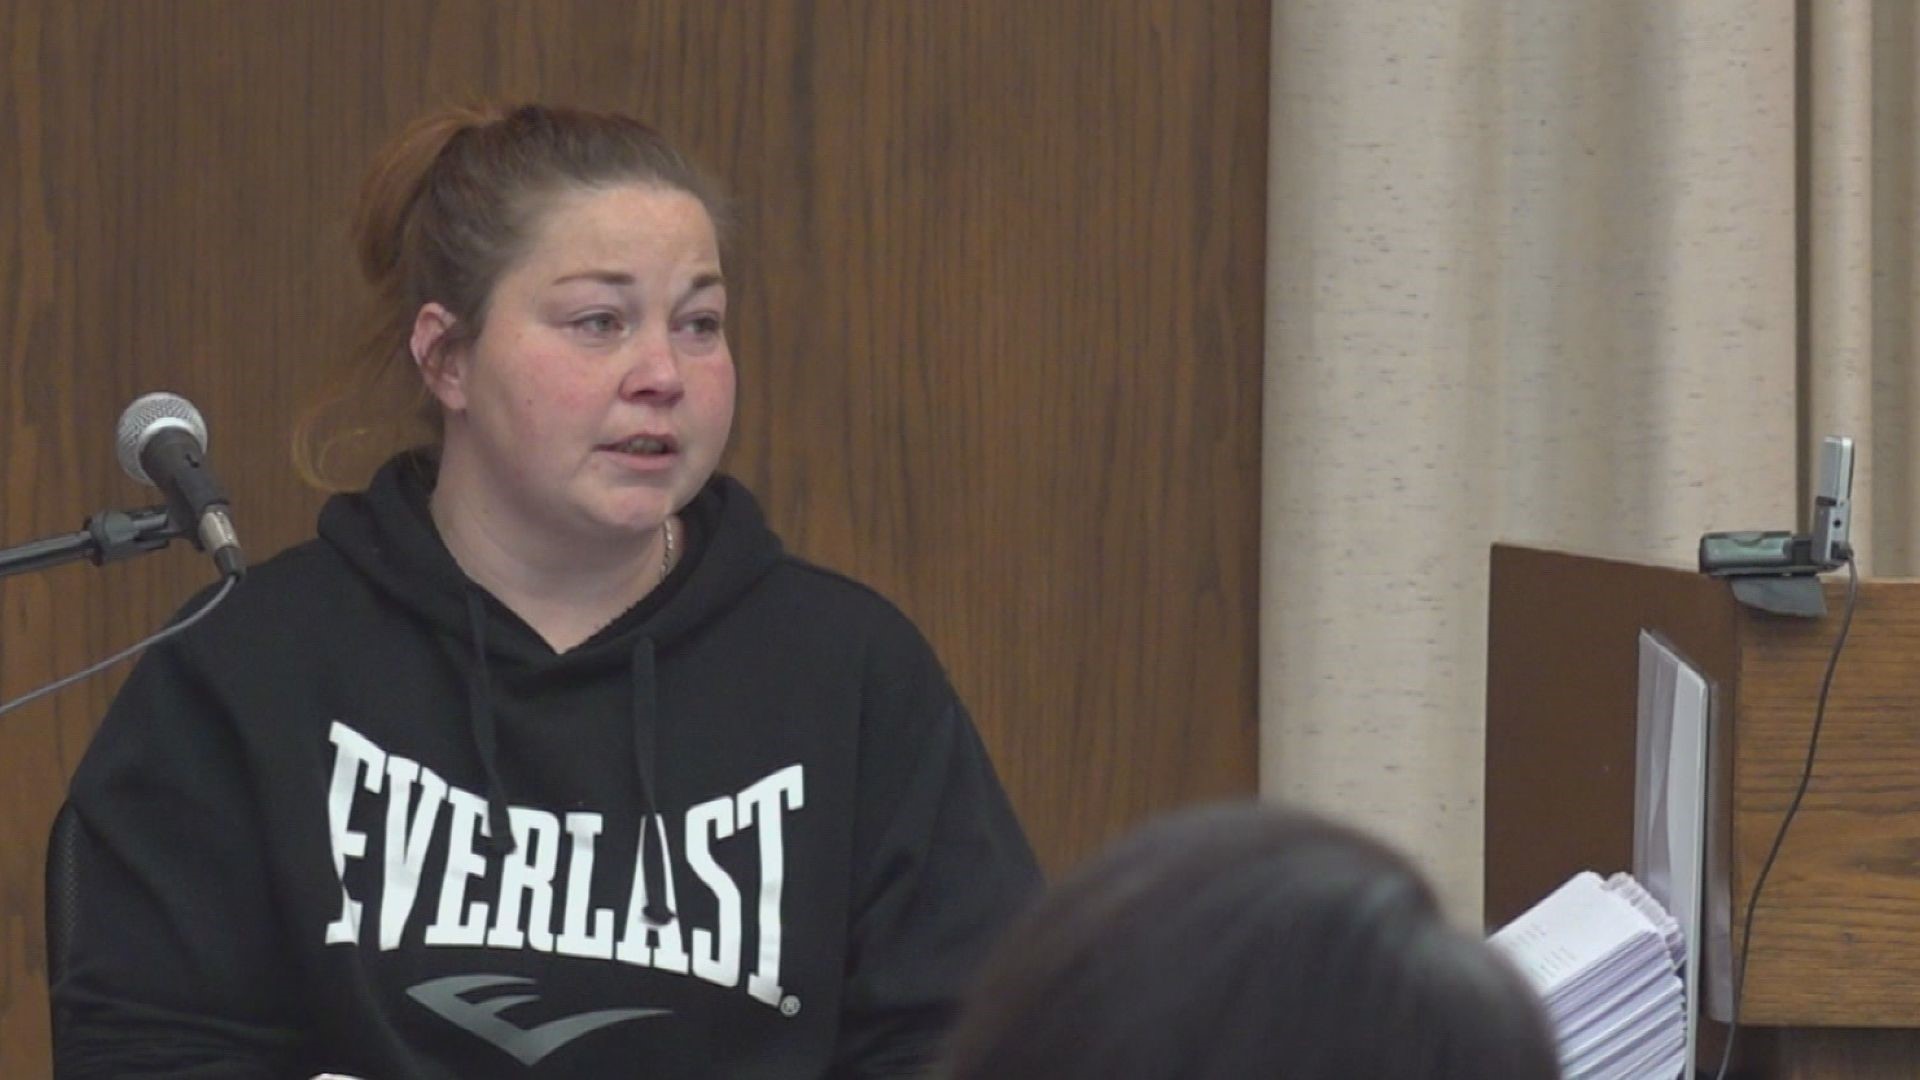 Jessicah Black, a key witness in the case, took the stand Friday. She said detectives repeatedly told her she was lying when they interrogated her as a teenager.